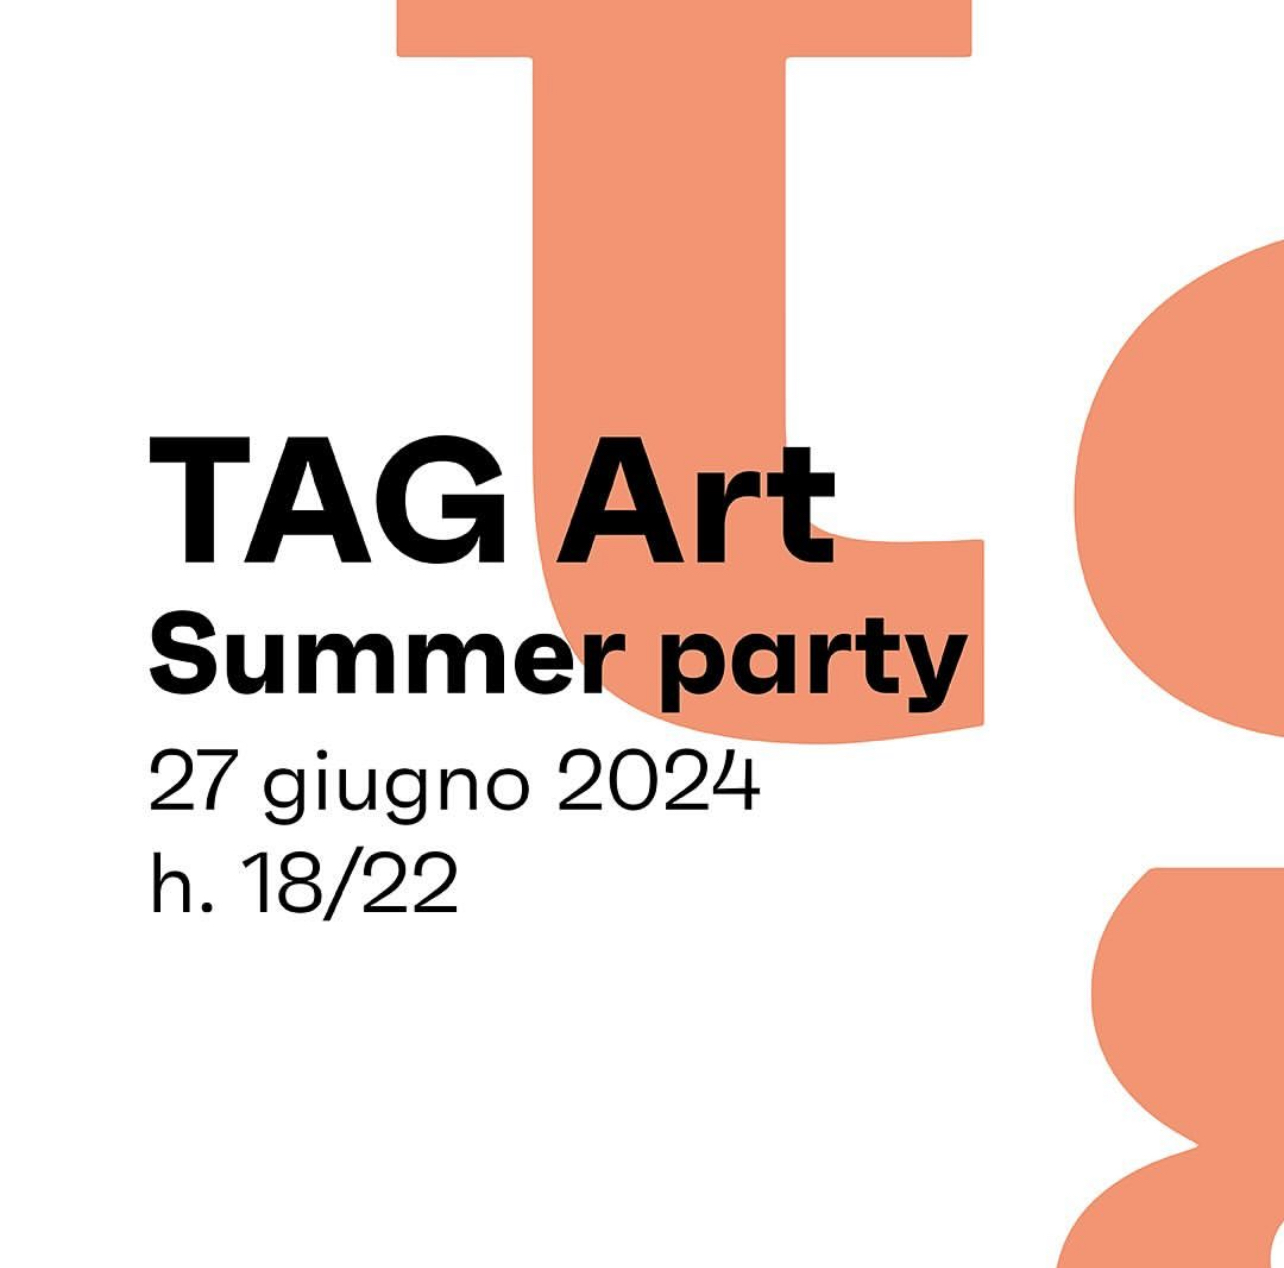 TAG ART SUMMER PARTY